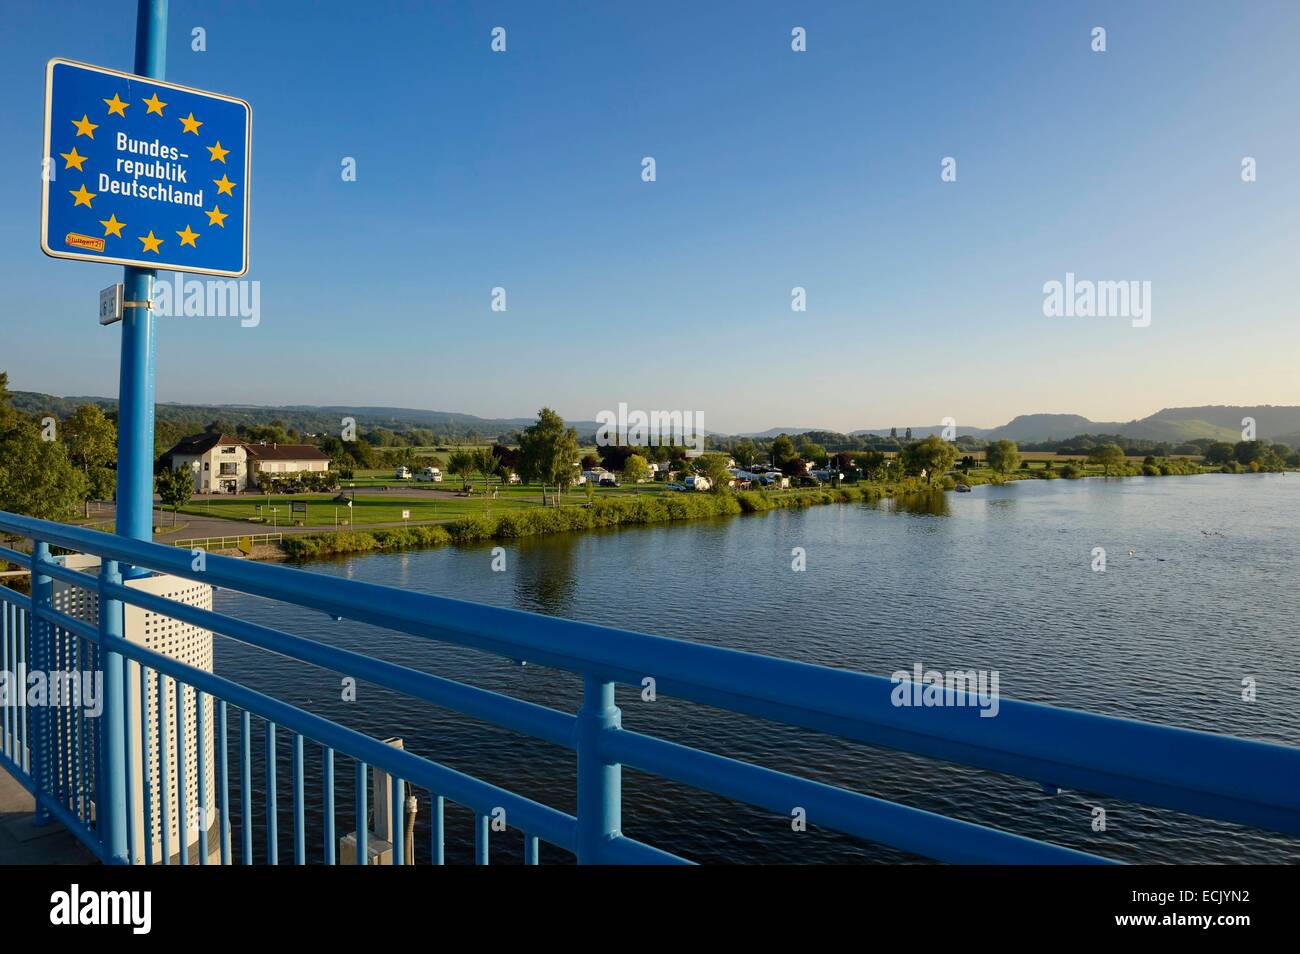 Luxembourg, Grevenmacher district, Moselle region, Remich, border bridge with Germany on the Mosel River Stock Photo